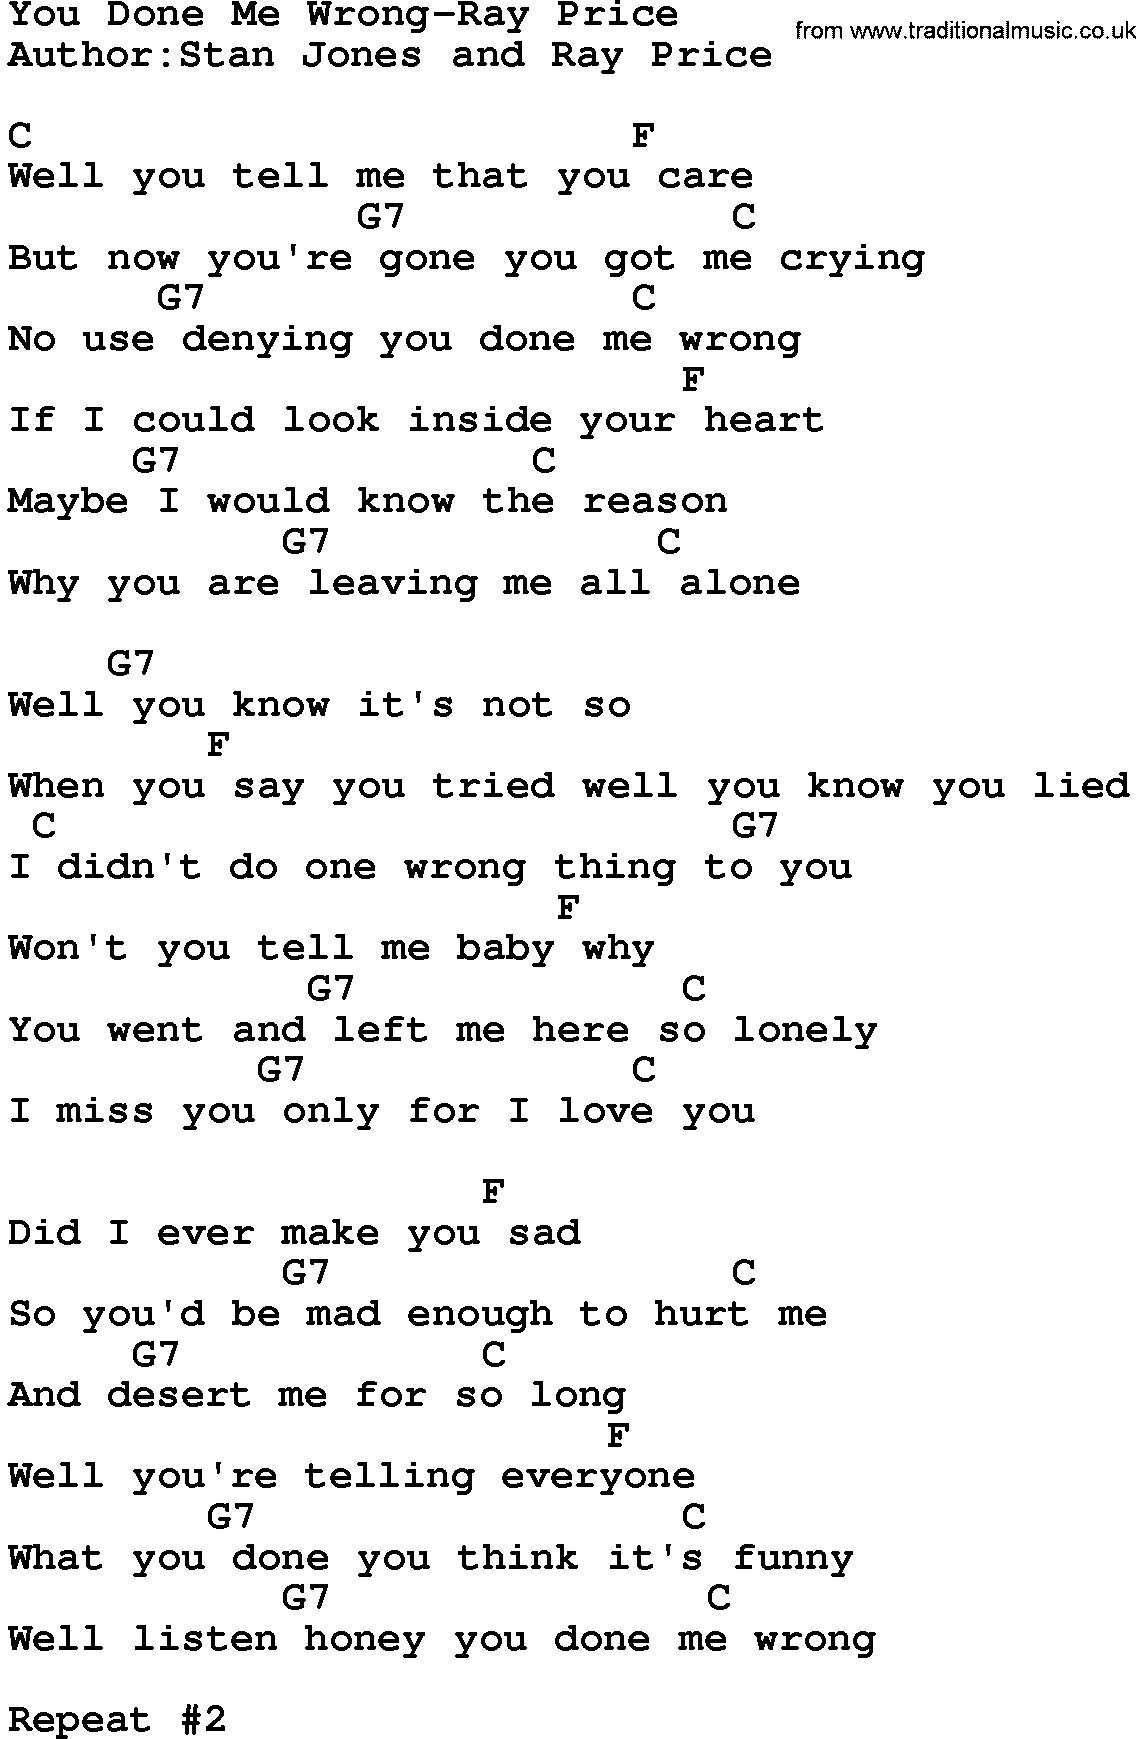 Country music song: You Done Me Wrong-Ray Price  lyrics and chords